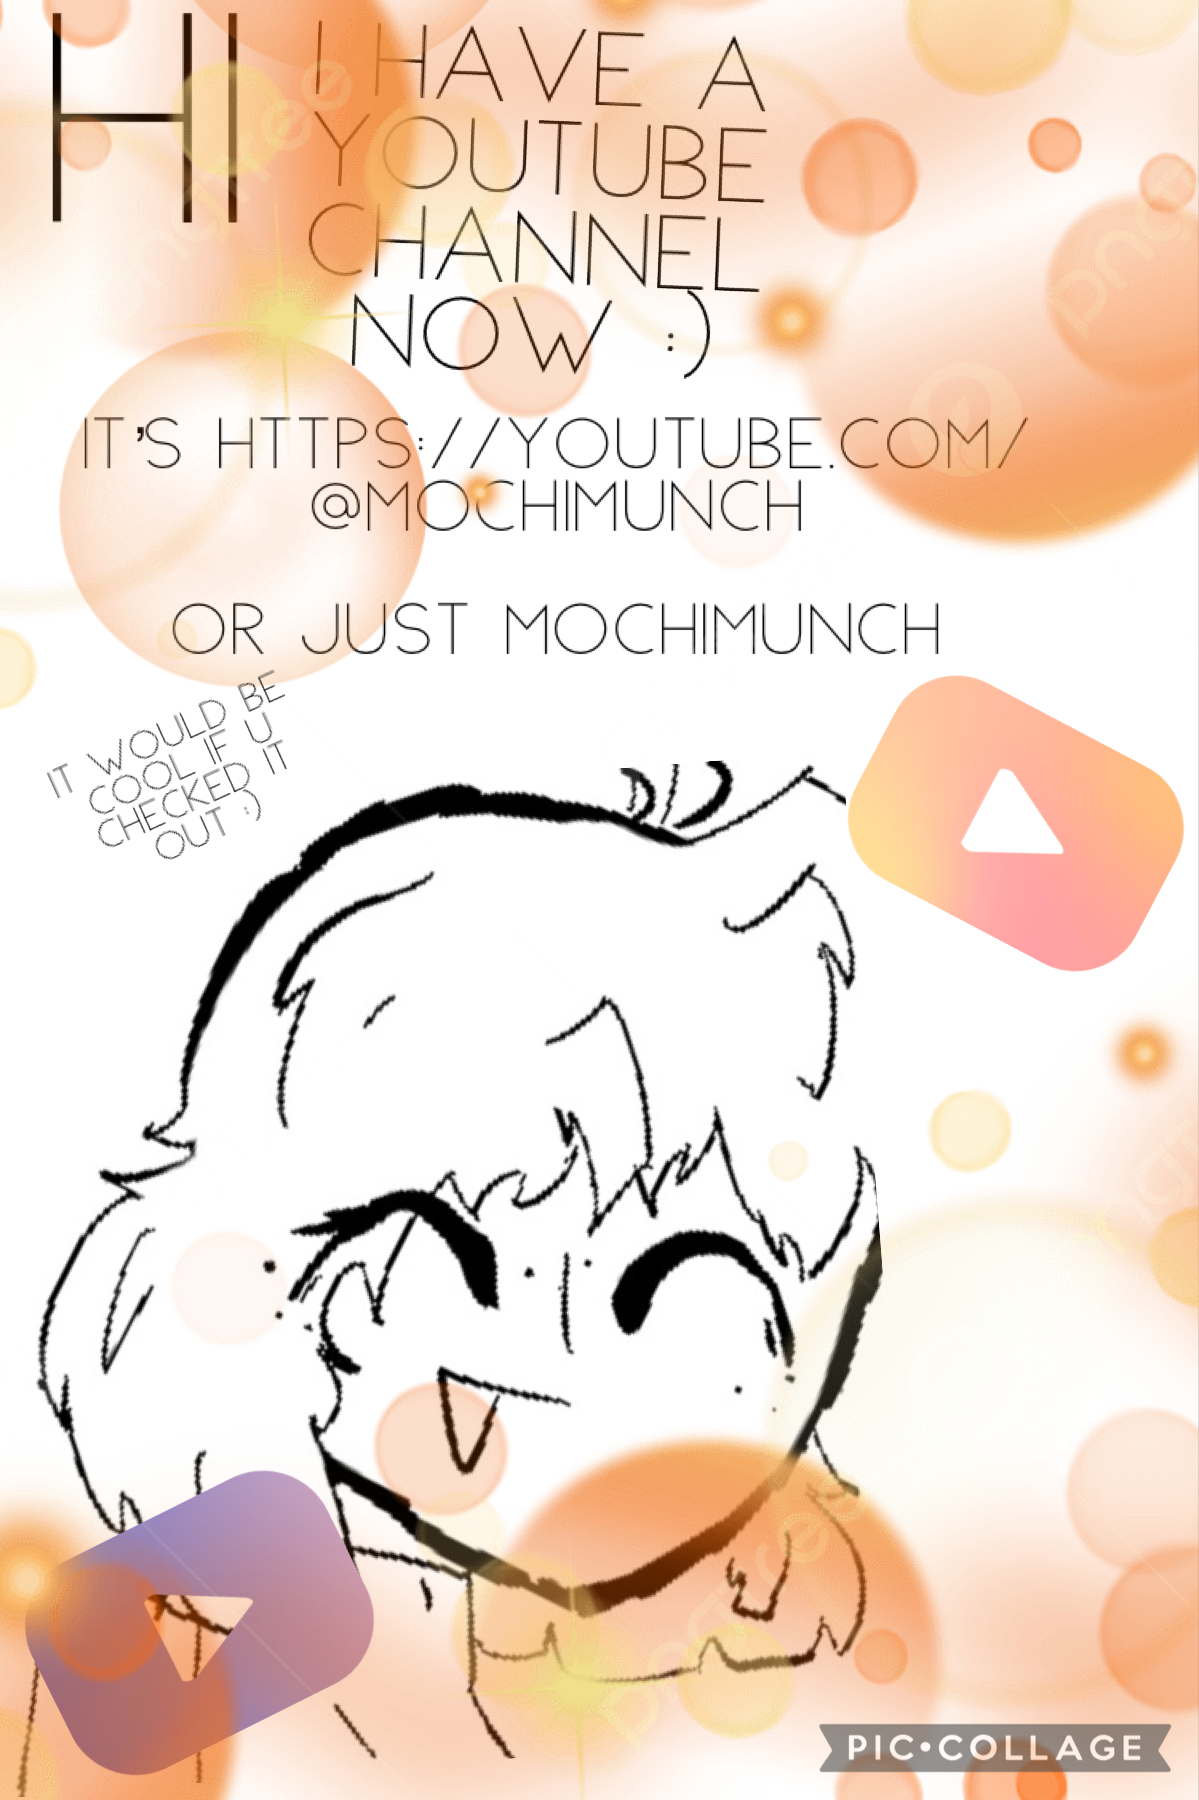 The link is https://youtube.com/@MochiMunch so ye have a nice April everyone :)